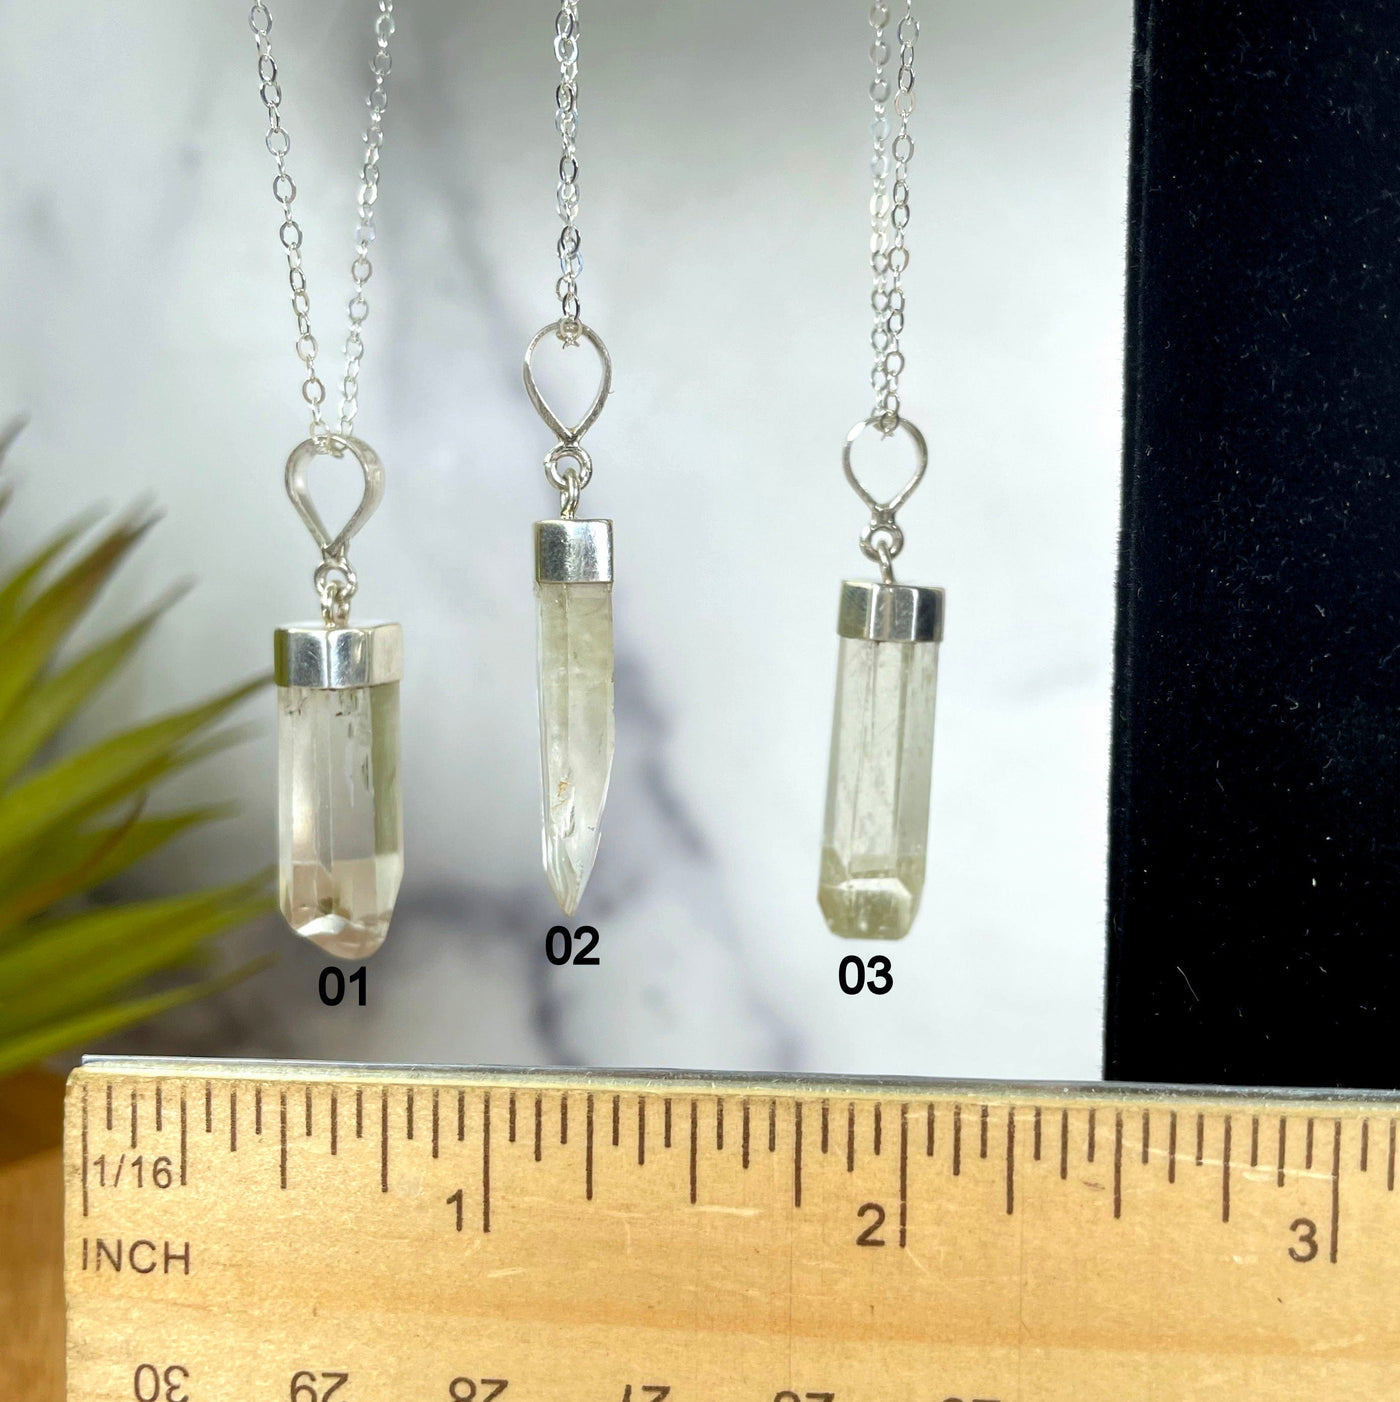 kunzite necklace options 01 02 03 with ruler for size reference